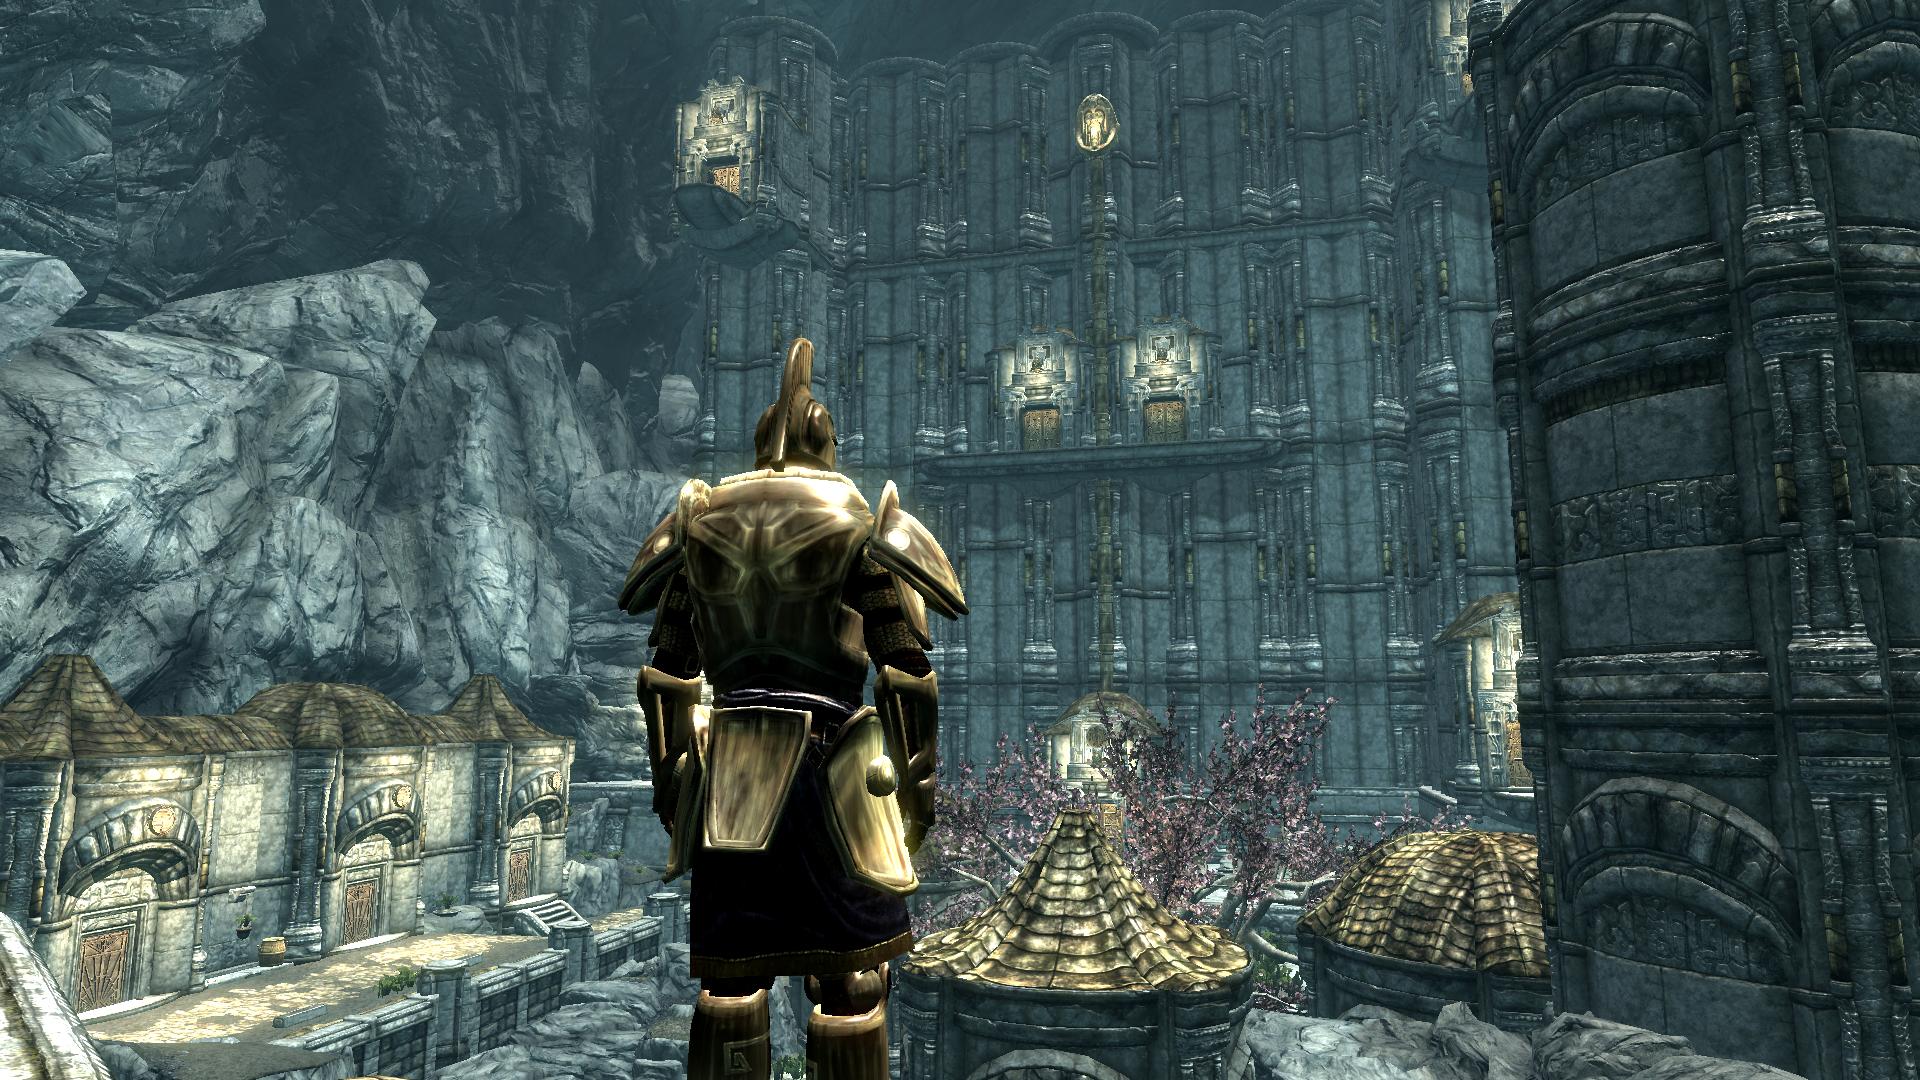 The Forgotten City: A Skyrim mod that became a favorite indie game